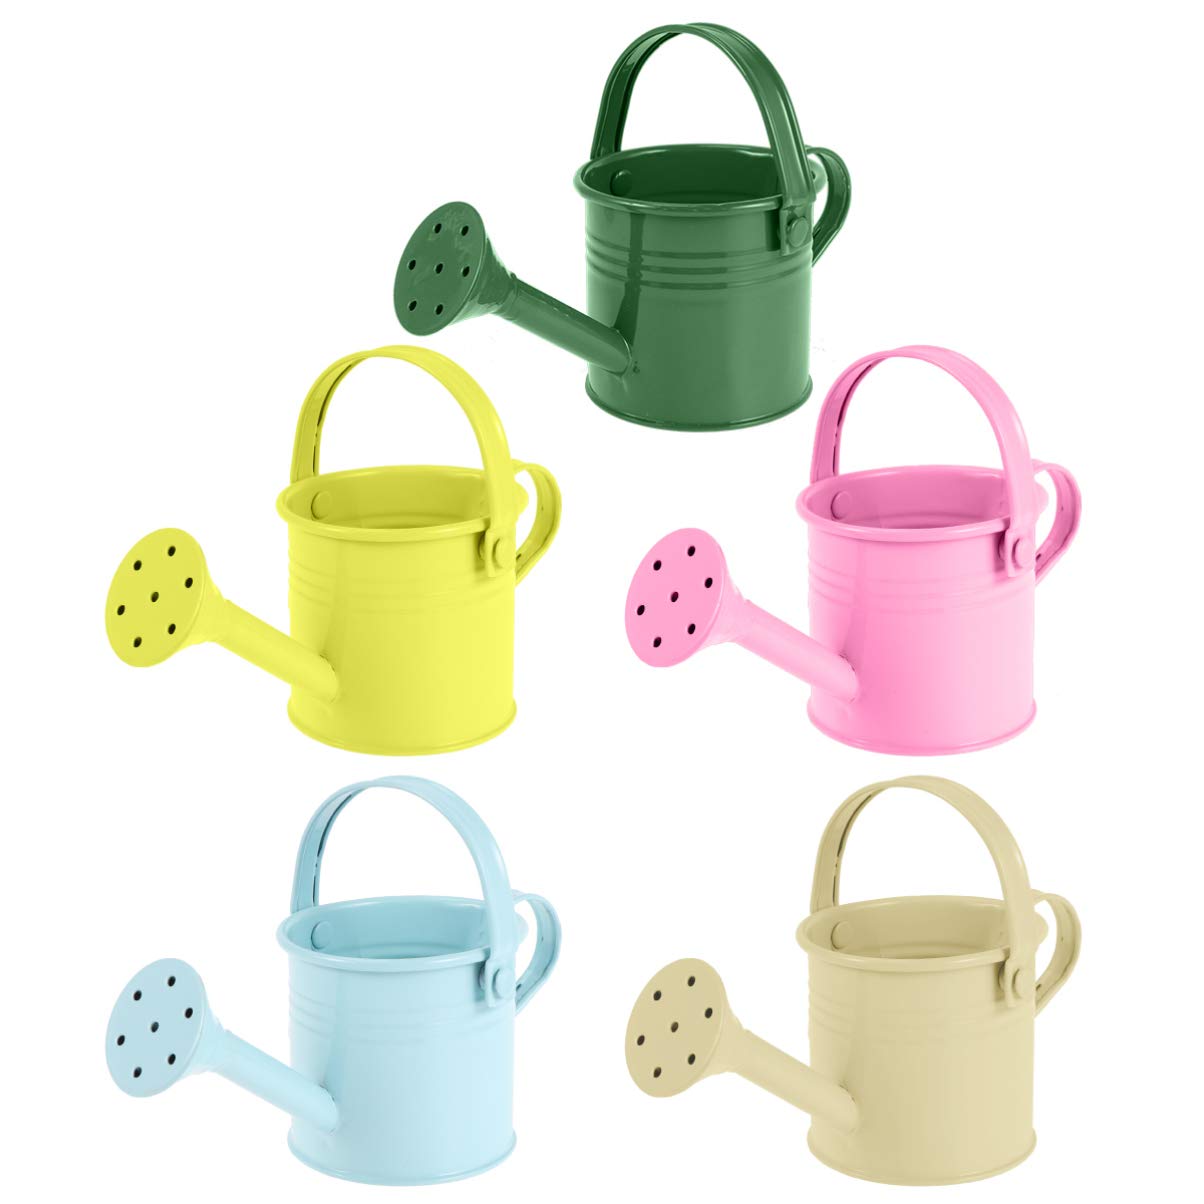 Hemoton Metal Watering Can, 5pcs Simple Kids Watering Can, Children Garden Watering Bucket Iron Watering Tin Can Sprinkling Kettle for Garden Plants Flower 5.9x2.95x2.95 in (Mixed Color)